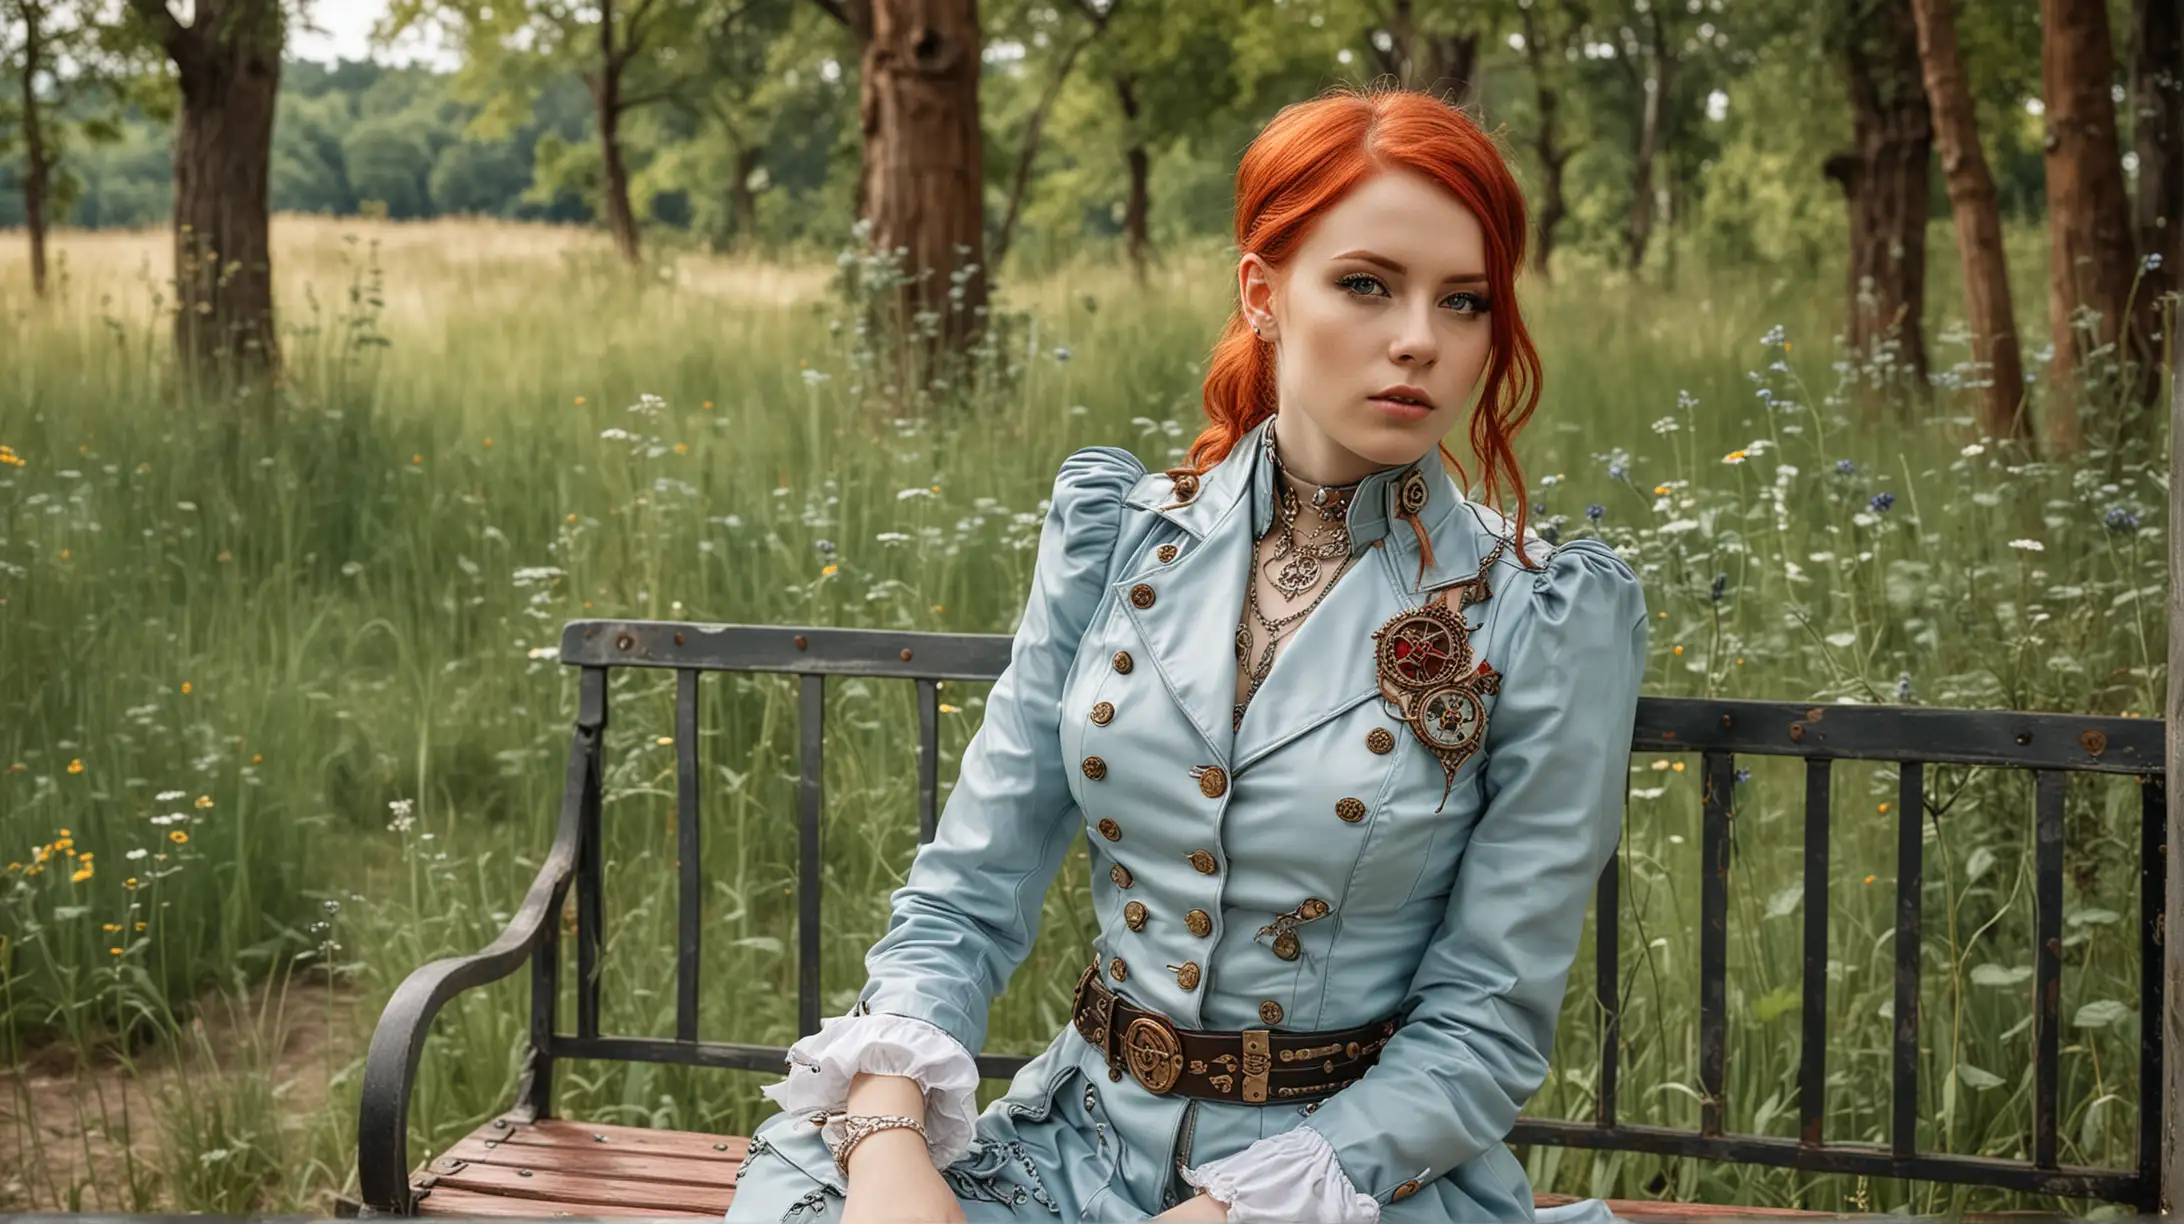 Steampunk Woman Relaxing in Sunny Wild Park